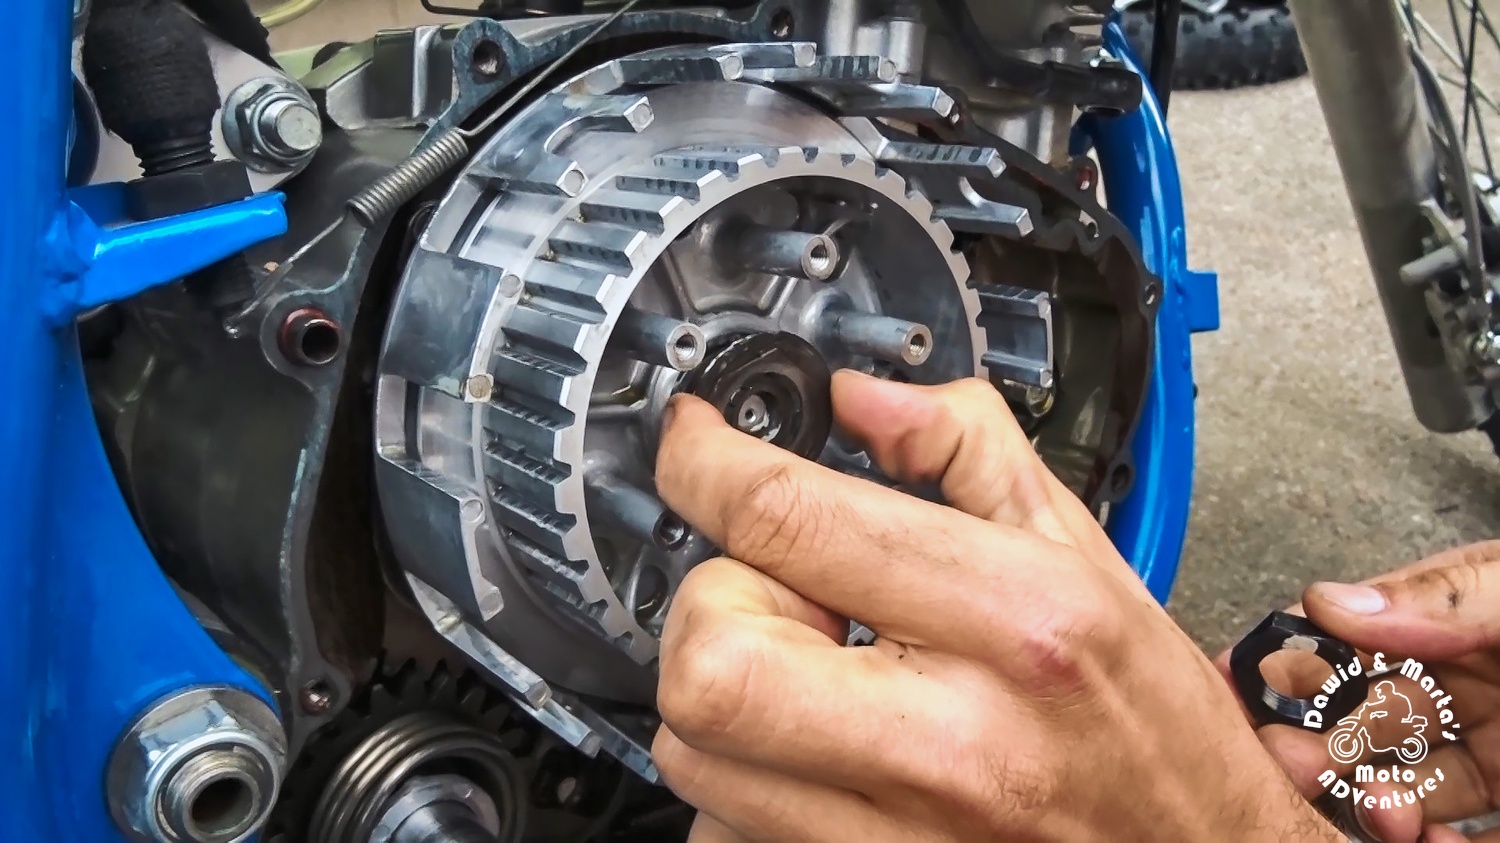 Removing the inner part of clutch basket